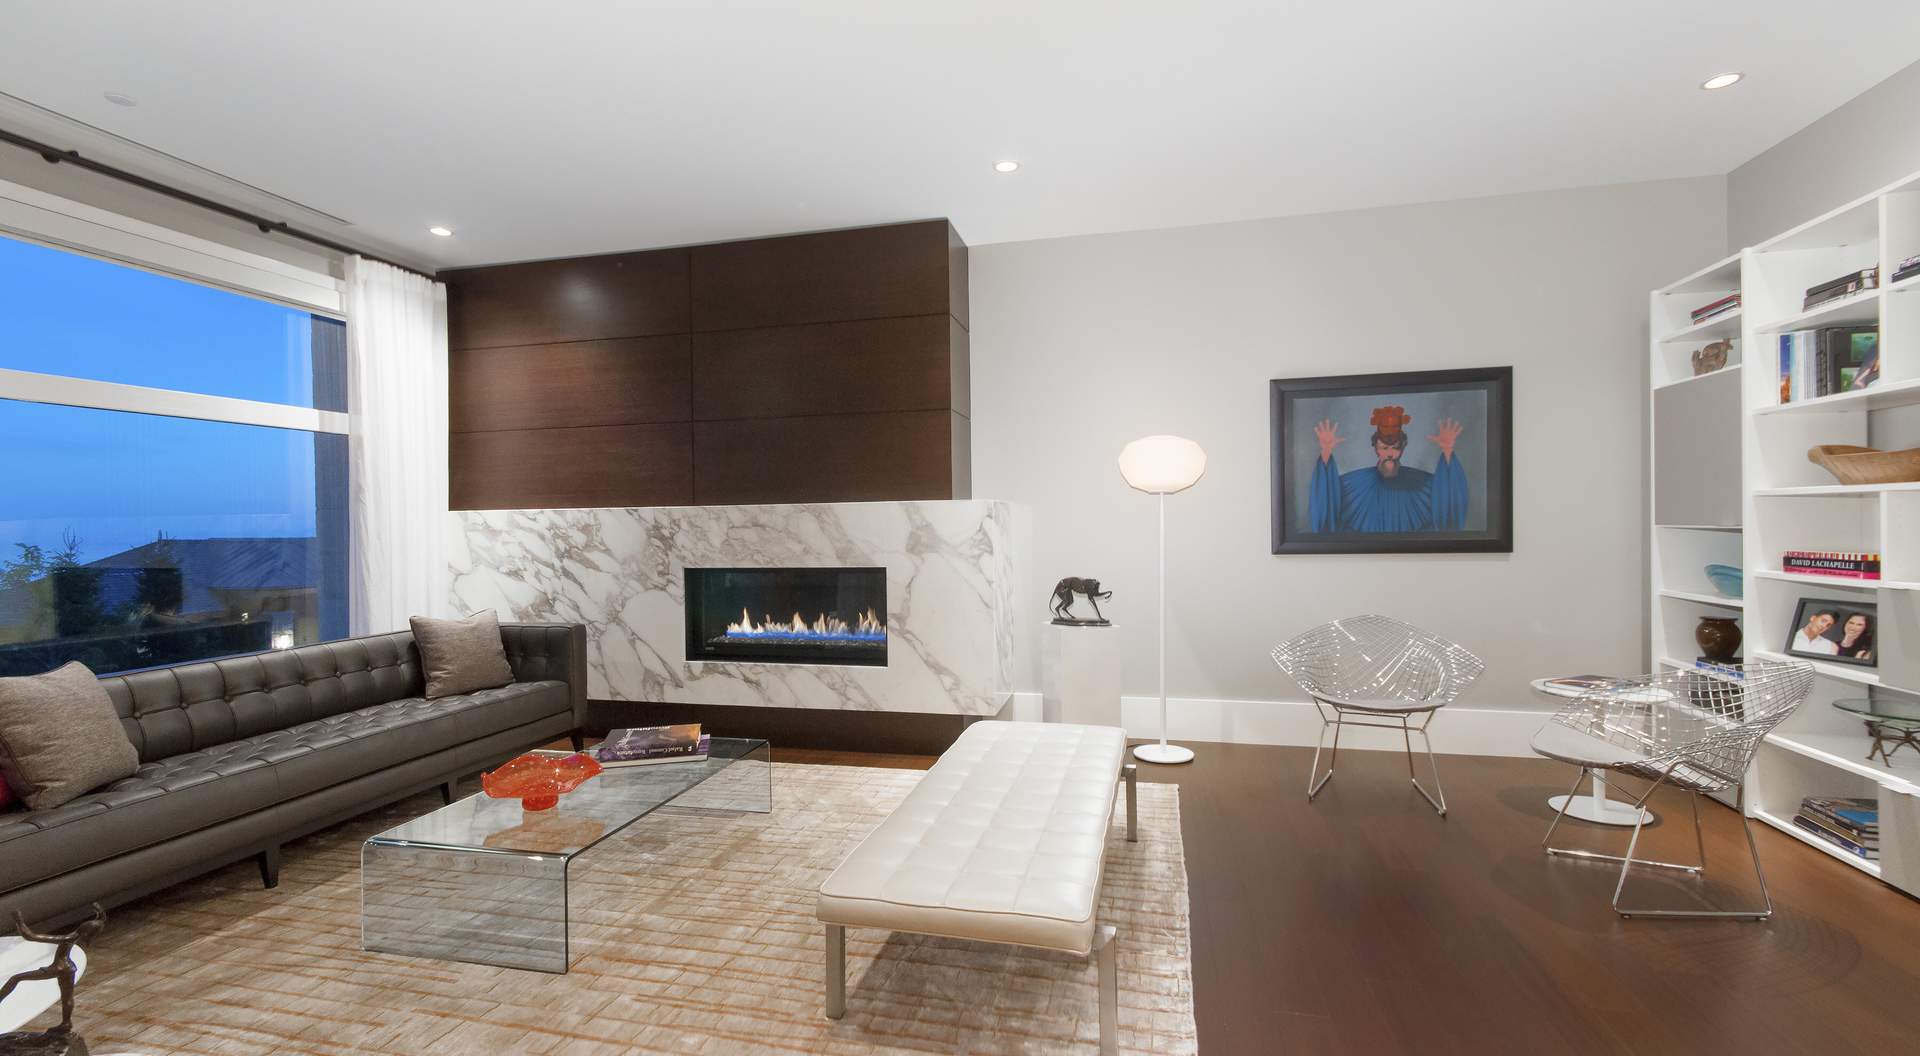 Modern gas fireplace with huge marble surround, medium dark wood floors with area rug, glass coffee table